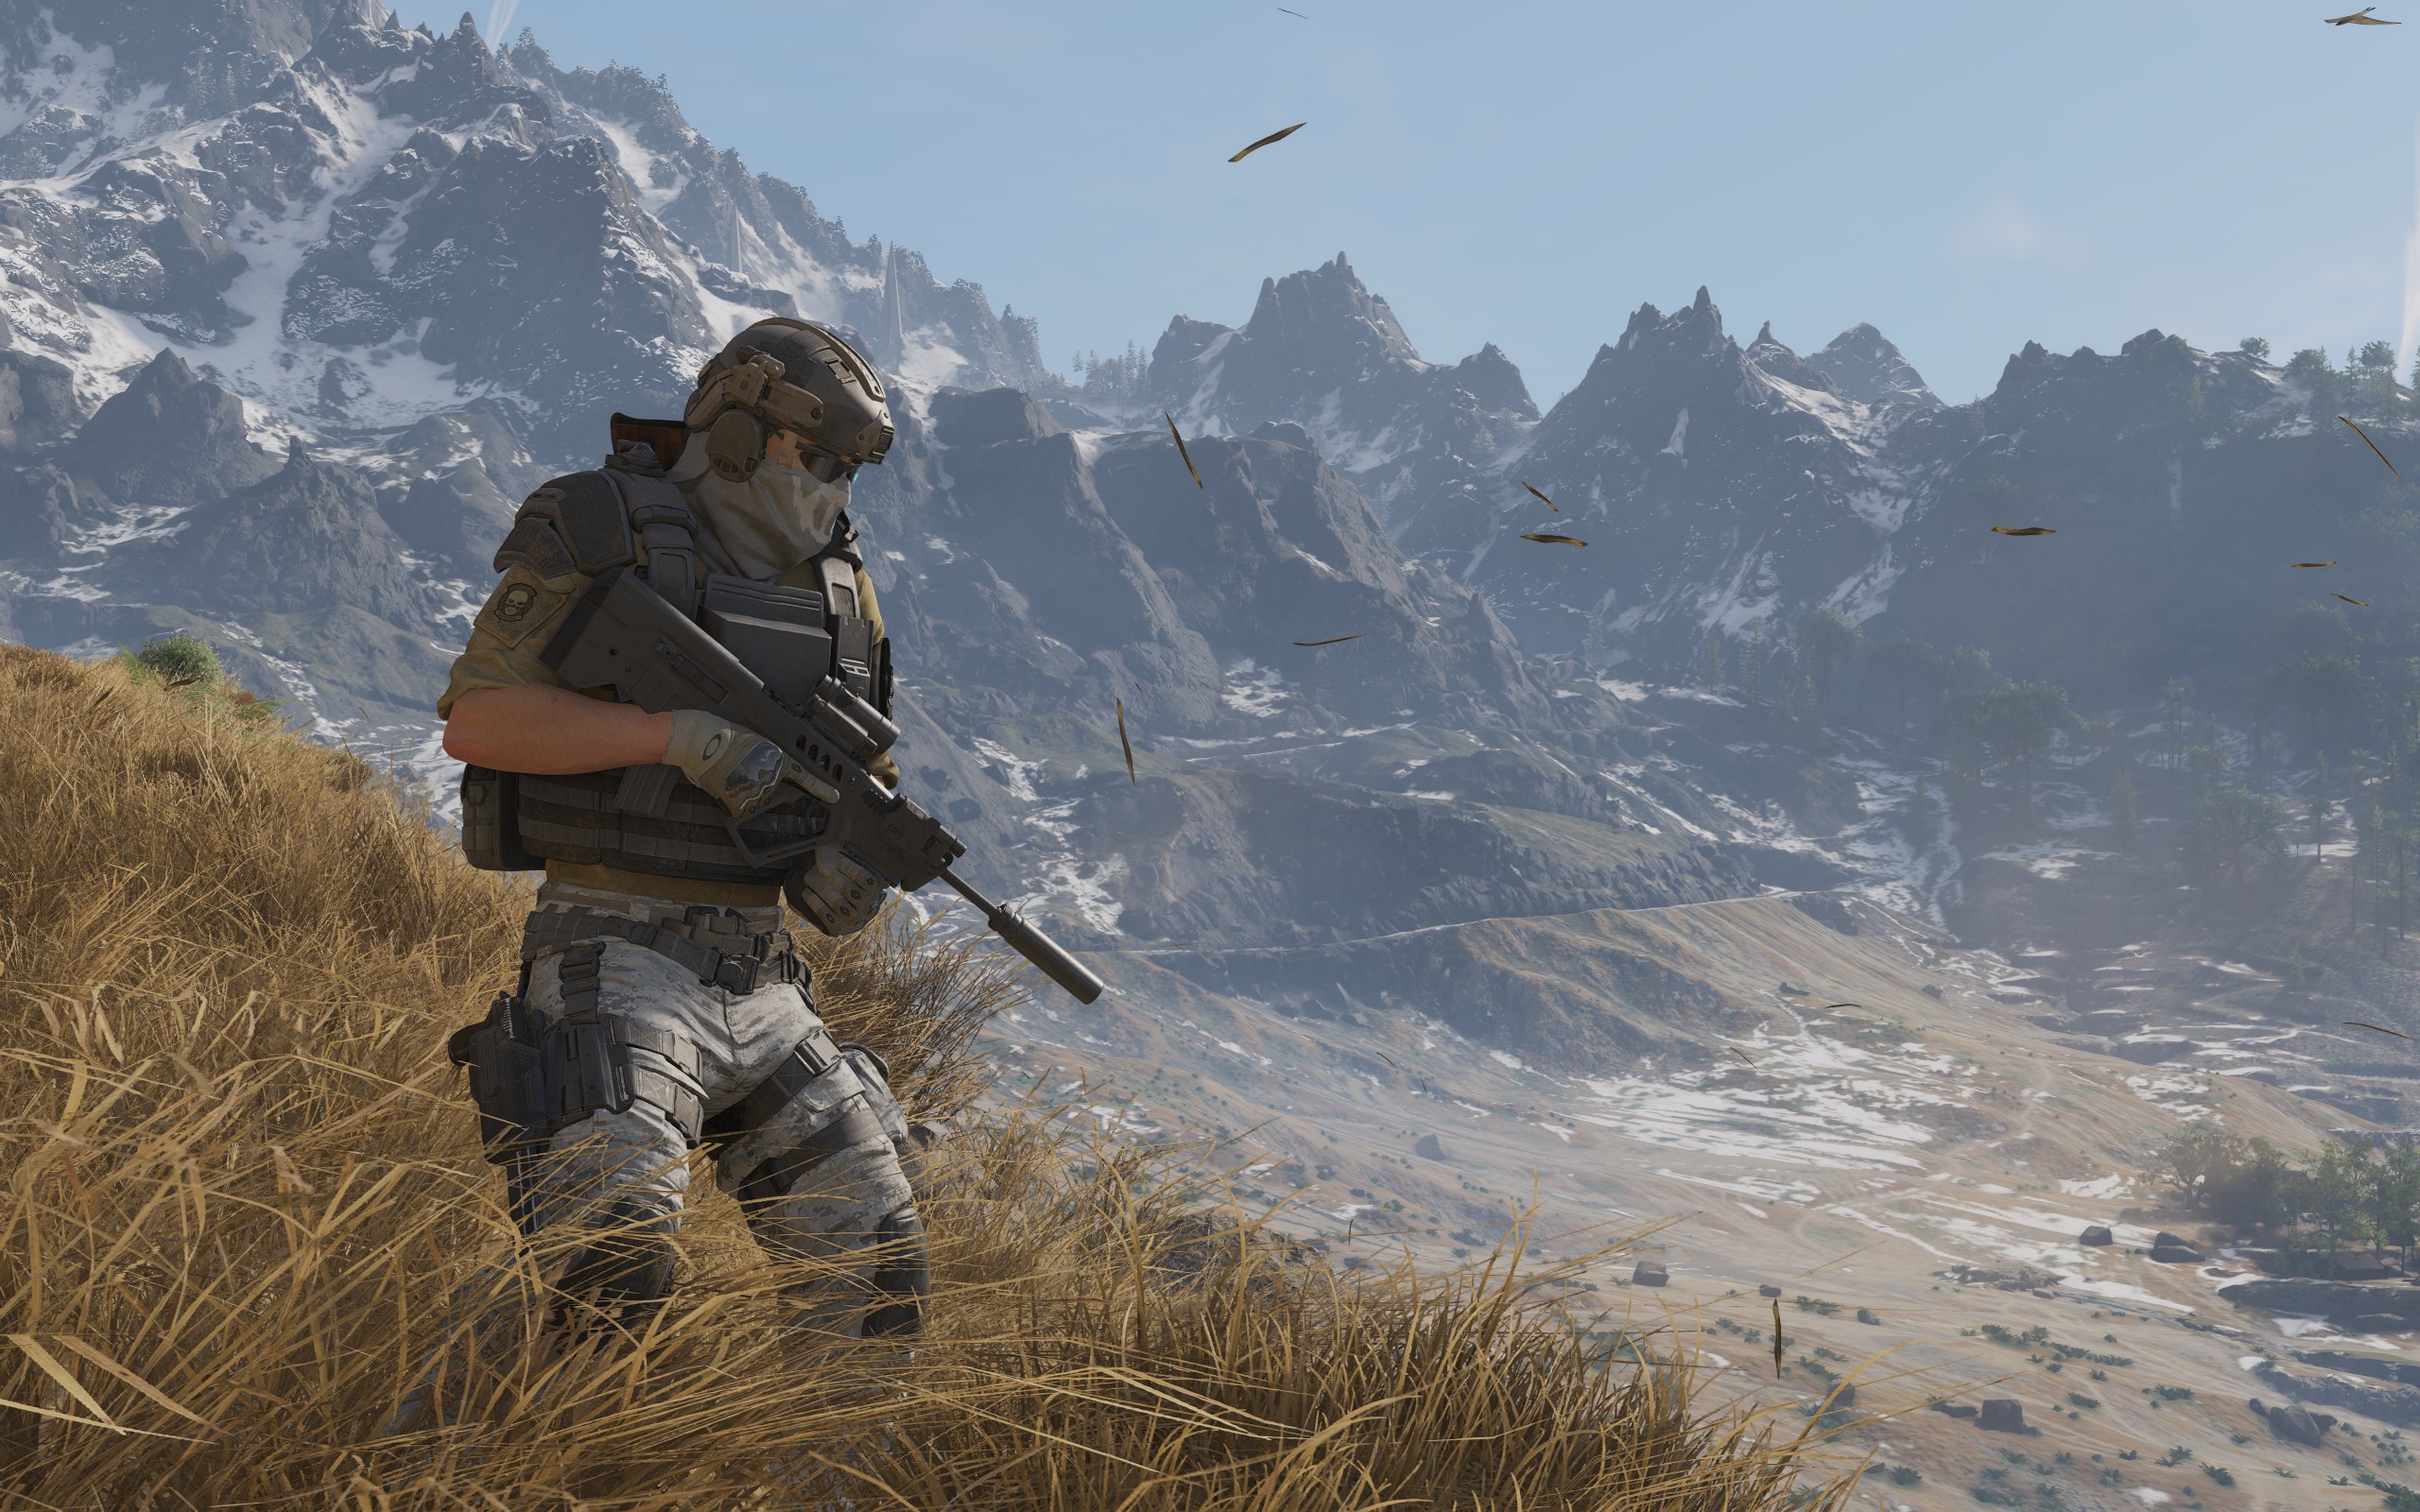 General 2560x1600 Ghost Recon Breakpoint Tom Clancy's Ghost Recon screen shot PC gaming video games CGI gun helmet mountains